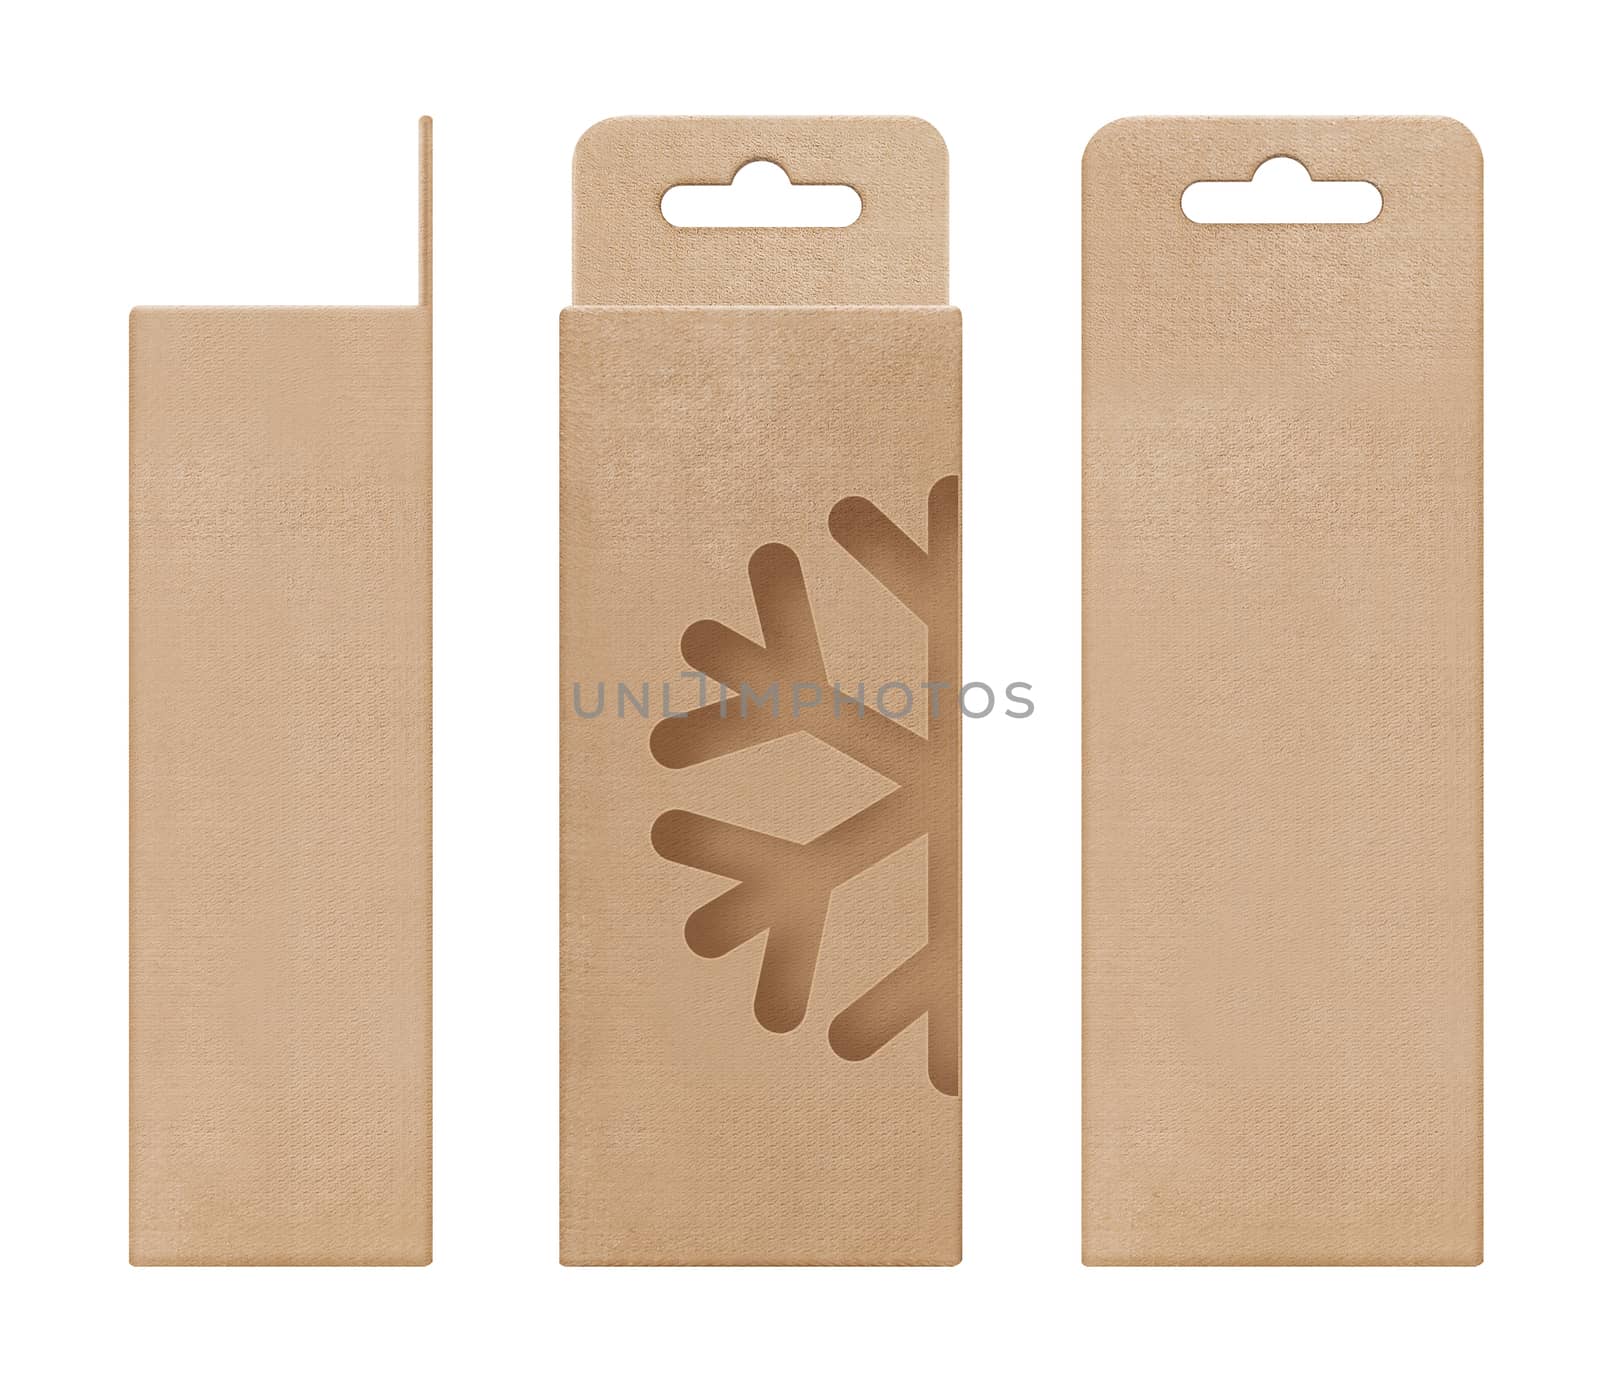 box, packaging, box brown for hanging cut out window Ice snow shape open blank template for design product package by cgdeaw